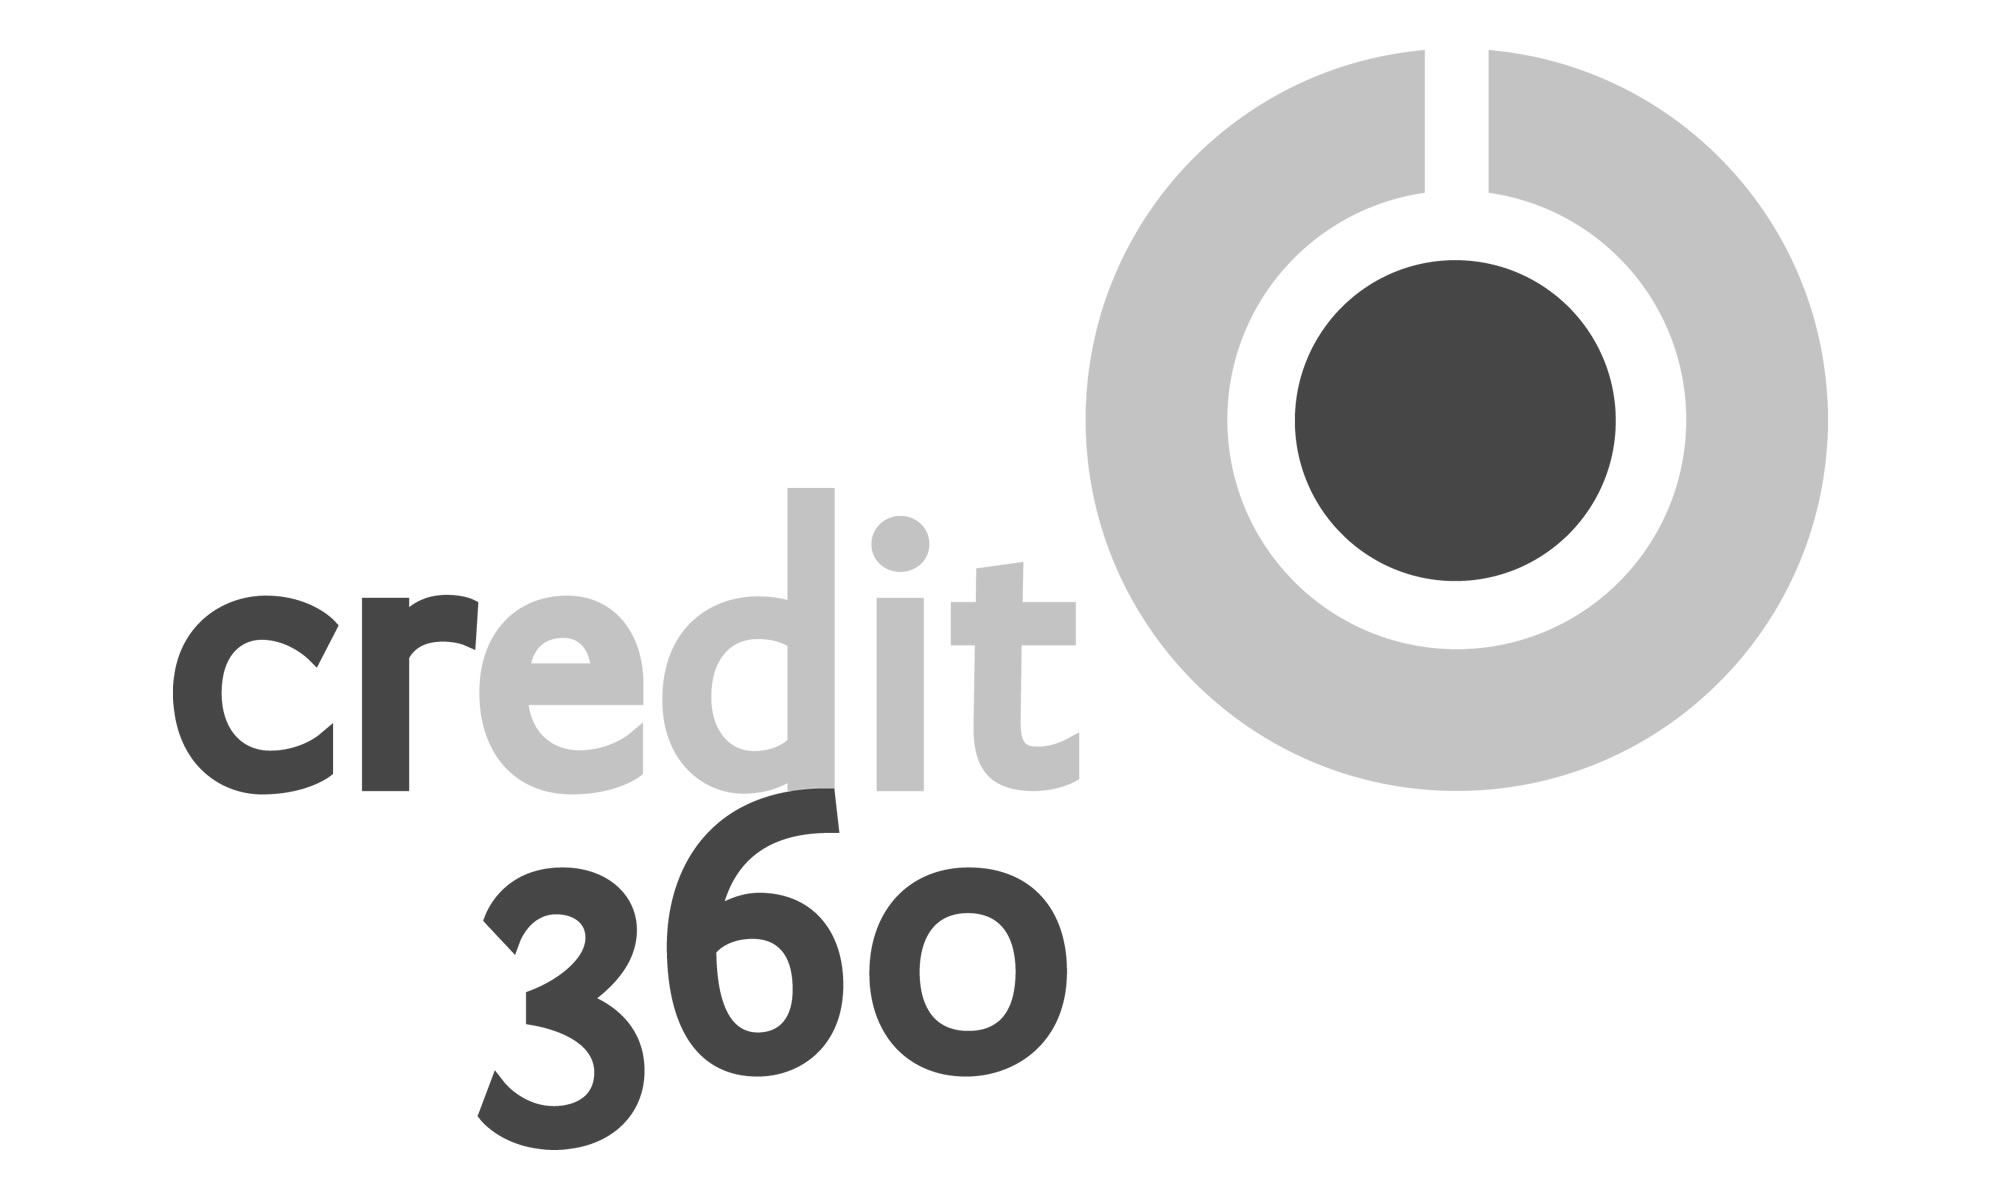 CRedit360 is a specialist provider of sustainability software that has developed a system which allows clients to incrementally build a system to manage all of their sustainability challenges in a single, integrated platform.